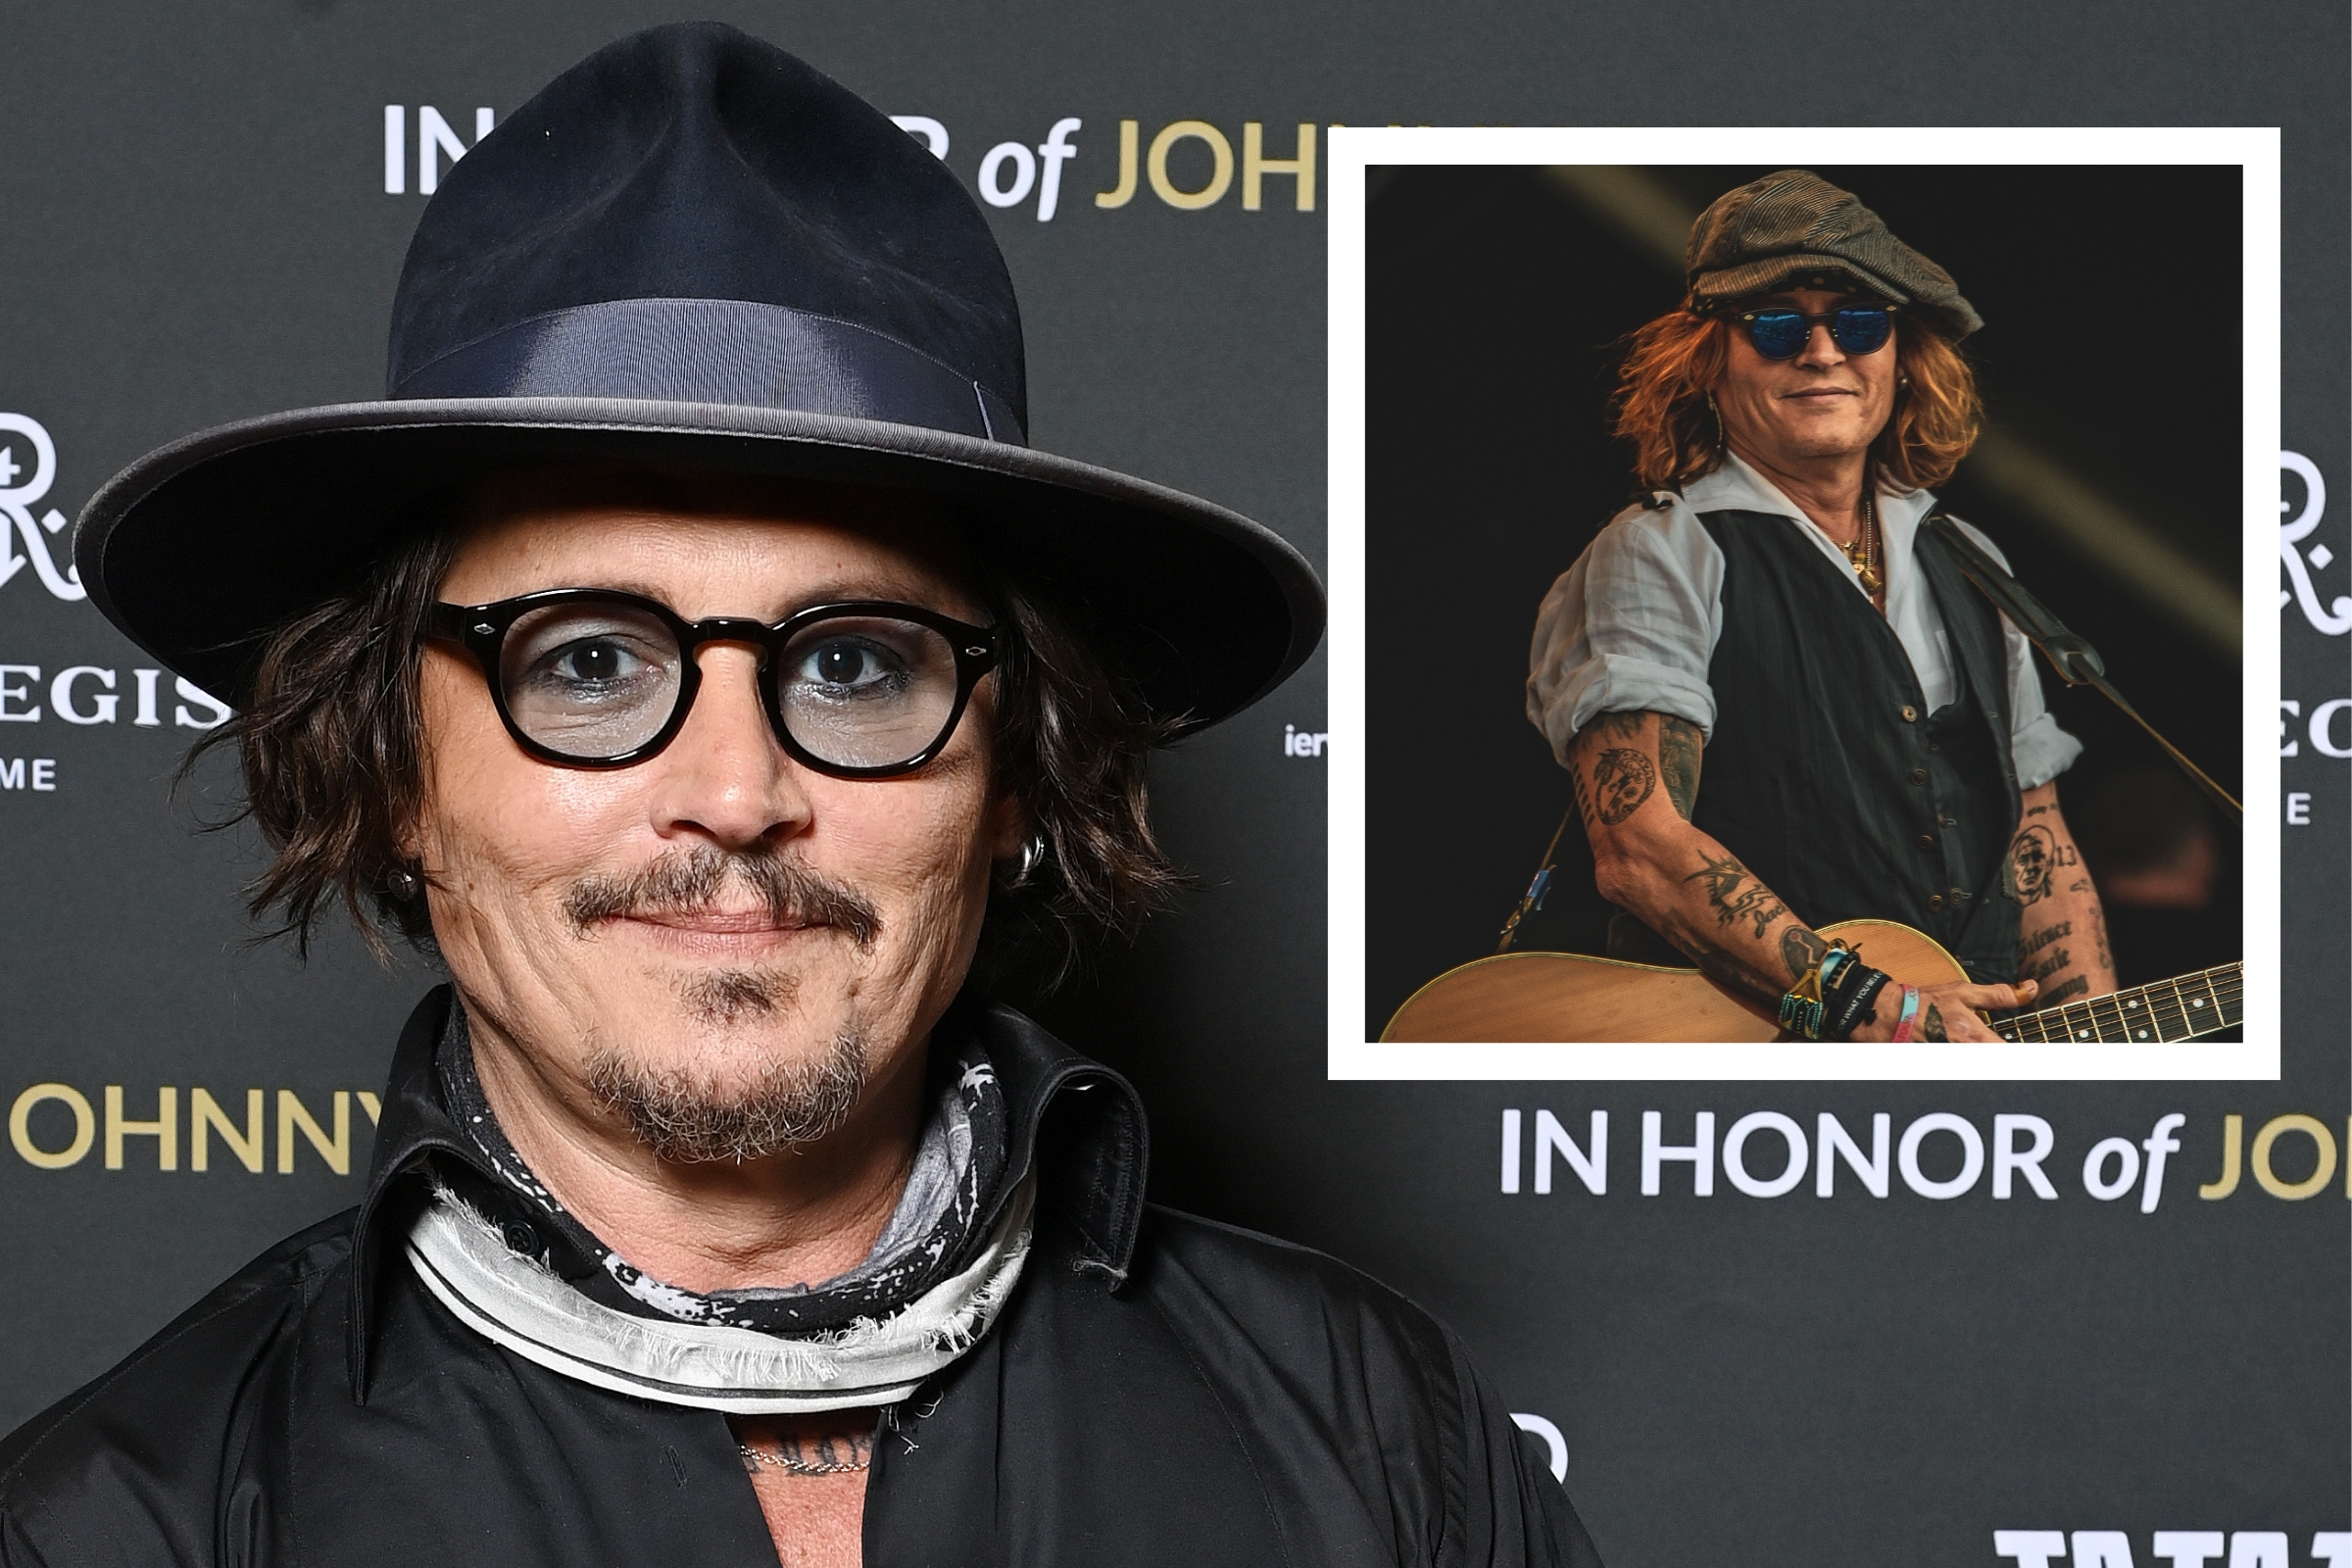 Johnny Depp defends Dior advert accused of being racially insensitive   Ents  Arts News  Sky News